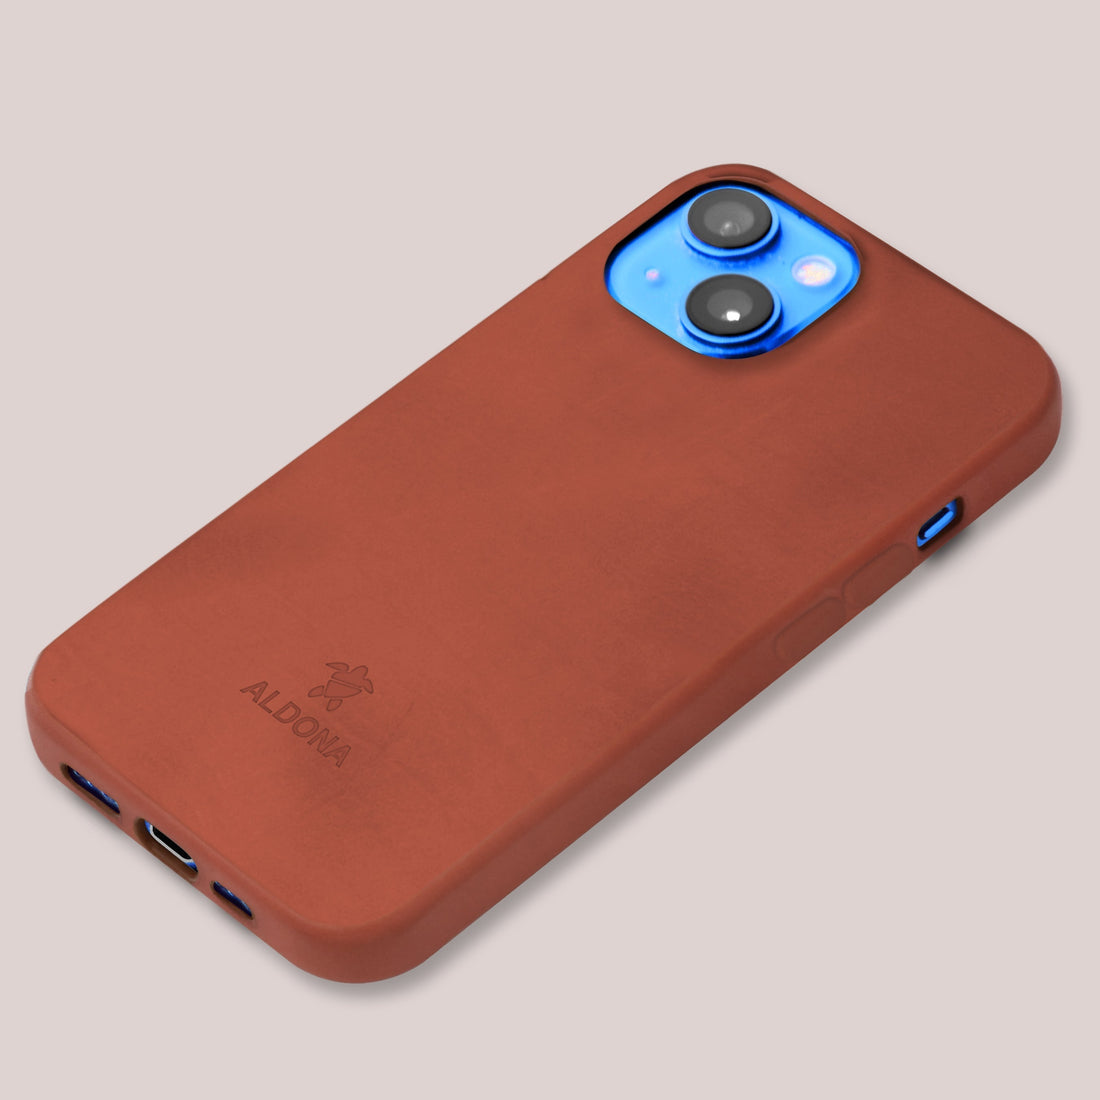 Kalon Case for iPhone 12 series with MagSafe Compatibility - Dark Soil